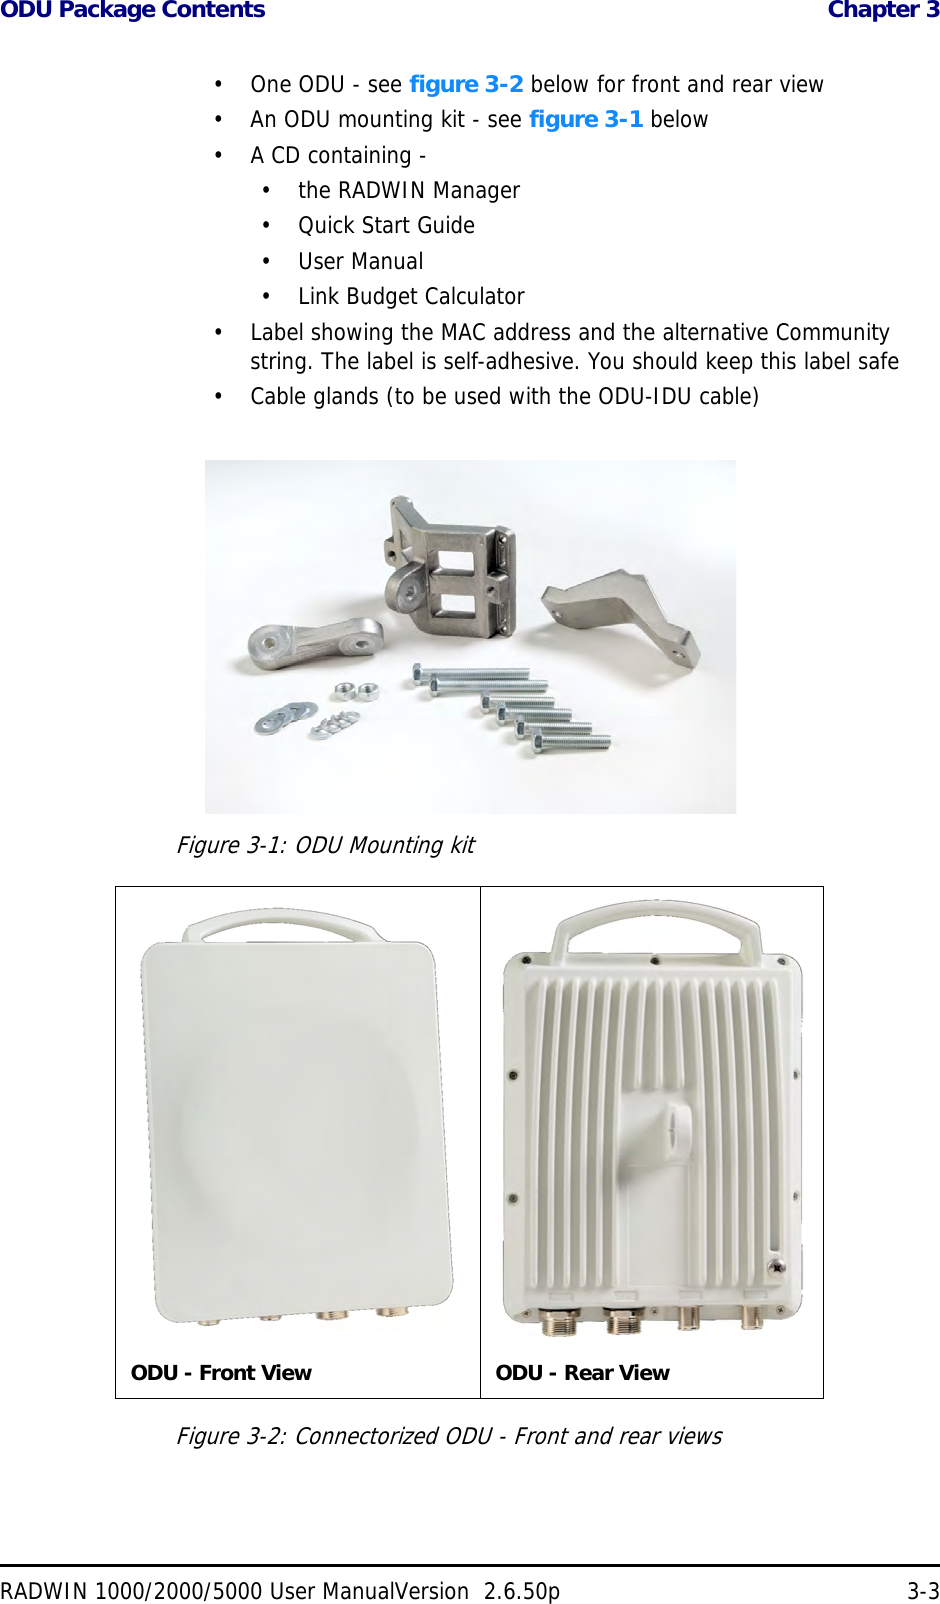 ODU Package Contents  Chapter 3RADWIN 1000/2000/5000 User ManualVersion  2.6.50p 3-3• One ODU - see figure 3-2 below for front and rear view• An ODU mounting kit - see figure 3-1 below• A CD containing -• the RADWIN Manager•Quick Start Guide• User Manual• Link Budget Calculator• Label showing the MAC address and the alternative Community string. The label is self-adhesive. You should keep this label safe• Cable glands (to be used with the ODU-IDU cable)Figure 3-1: ODU Mounting kitFigure 3-2: Connectorized ODU - Front and rear viewsODU - Front View ODU - Rear View